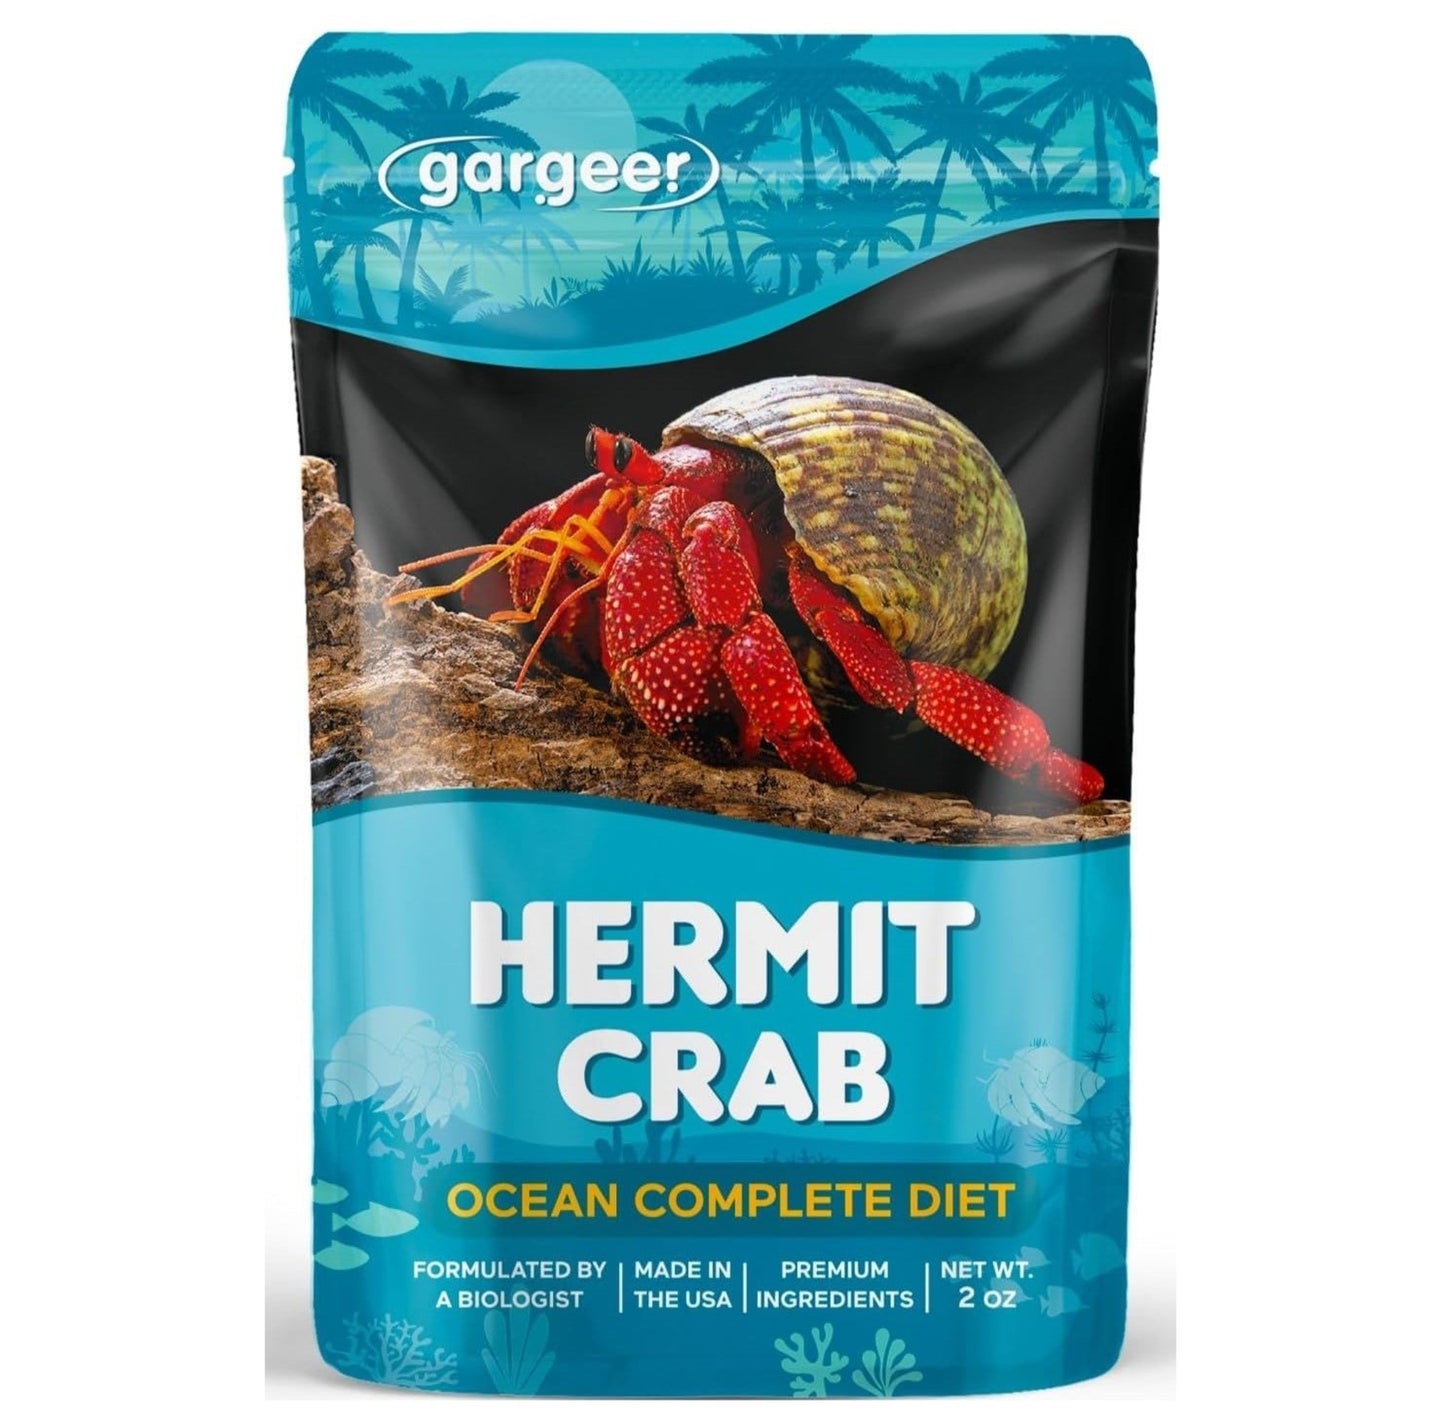 Gargeer 2oz Hermit Crab Ocean Blend Complete Diet. Easily Digested, Non-GMO Premium Ingredients Only. Strengthen Your Crab’s Exoskeleton, and Support All Nutritional and Immune System Needs